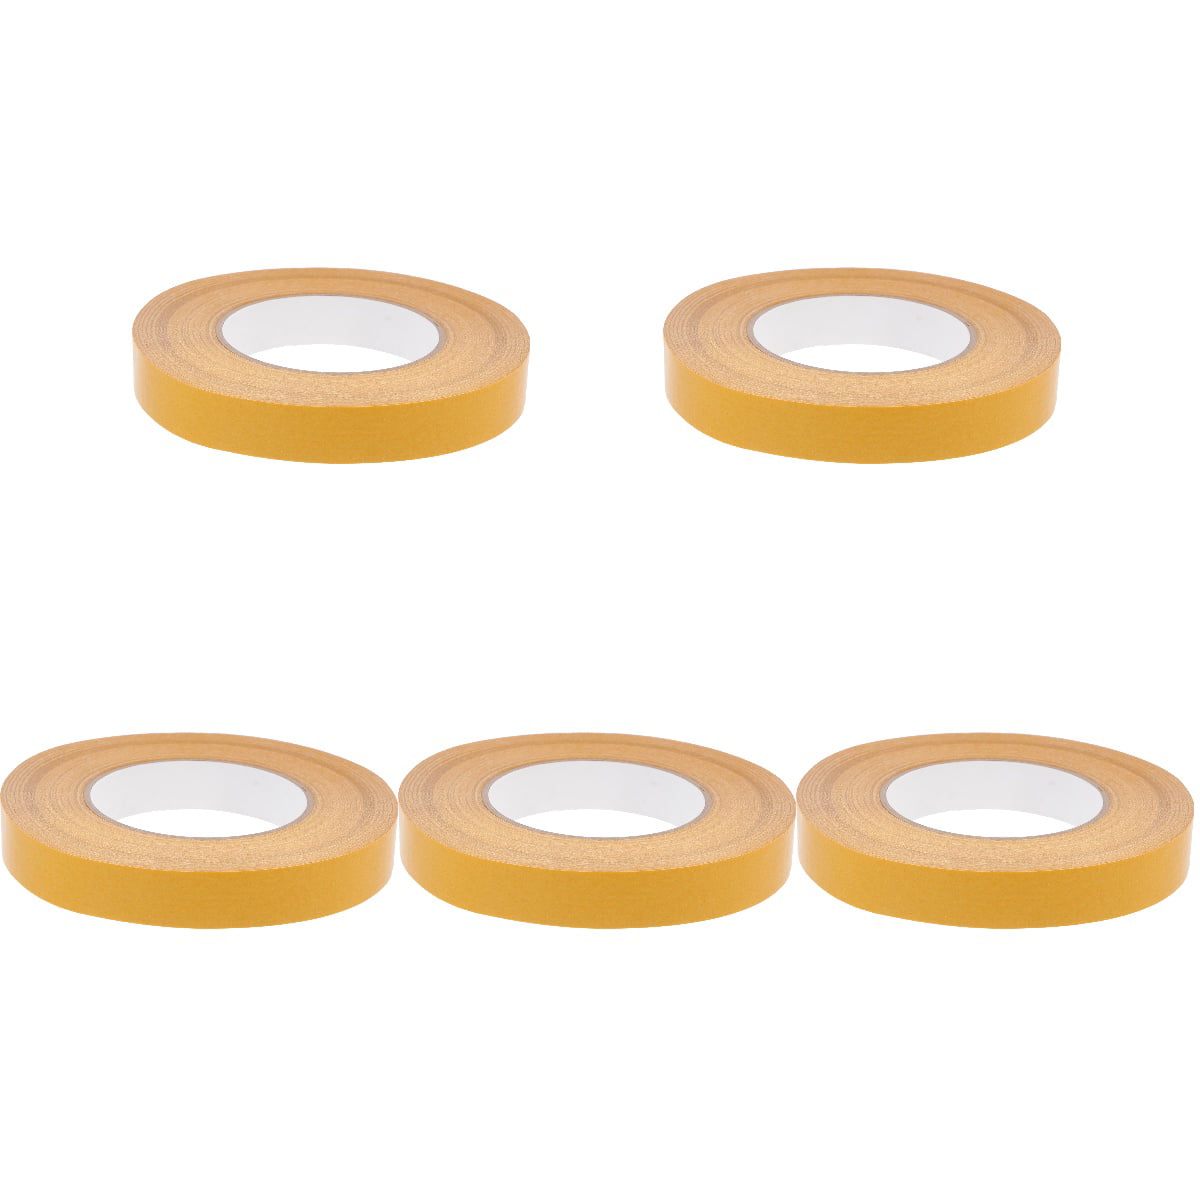 6 Pcs Double Sided Tape Roller, Double Sided Adhesive Tape Glue Tape Roller Tape Runner for Scrapbooking Supplies (0.32Inch26Ft; 0.24Inch20Ft)